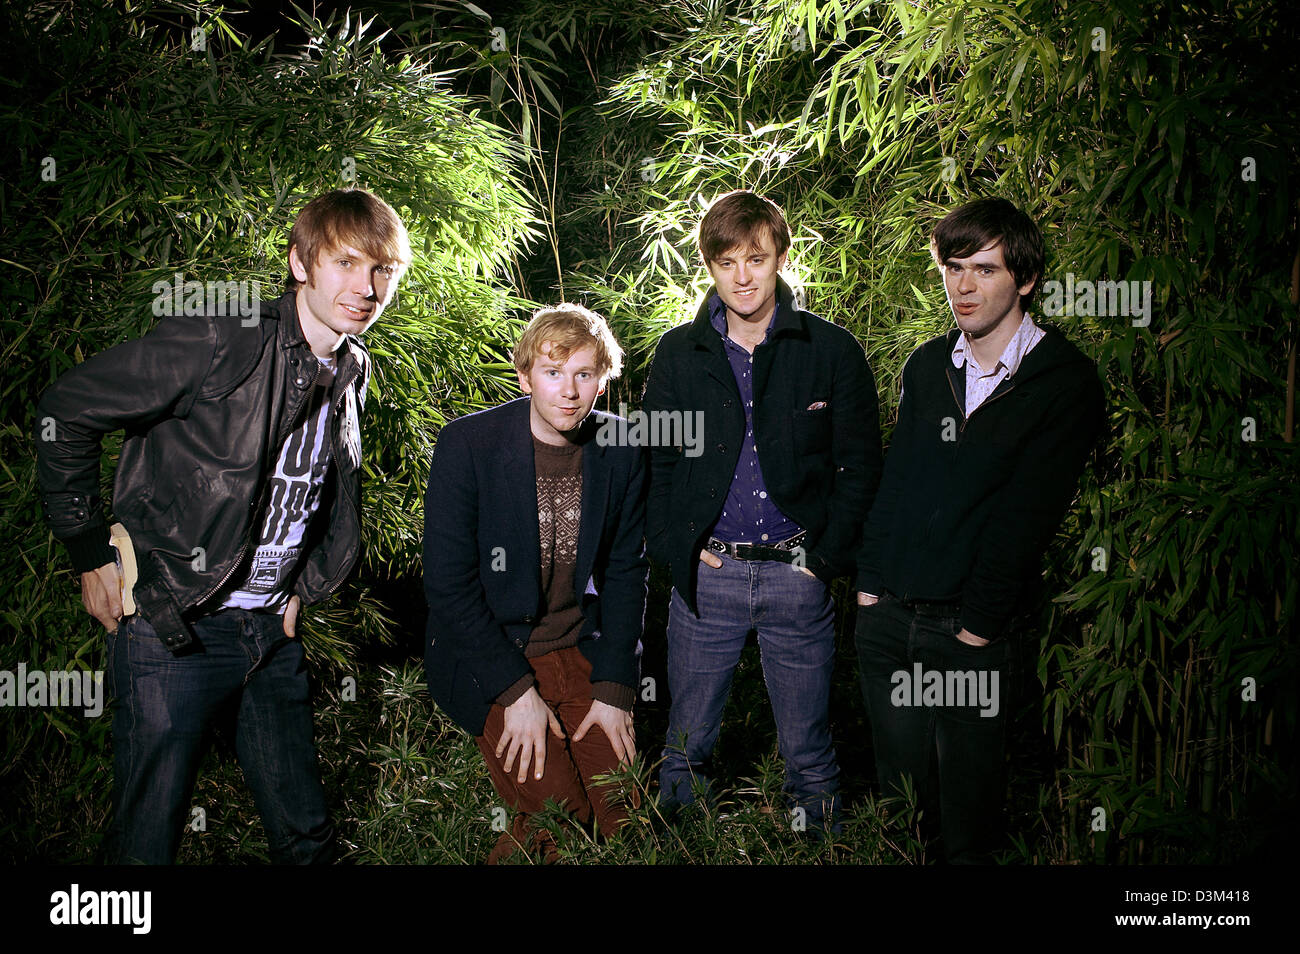 (dpa) - Members of Scottisch rock band Franz Ferdinand Alexander Kapranos, Bob Hardy, Nick McCarthy and Paul Thompson (L-R) pose at Bamboo garden in Duesseldorf, Germany, Sunday 06 November 2005. The band starts its concert tour in Duesseldorf with their new album 'You could have it so much better'. Photo: Andreas Jung Stock Photo